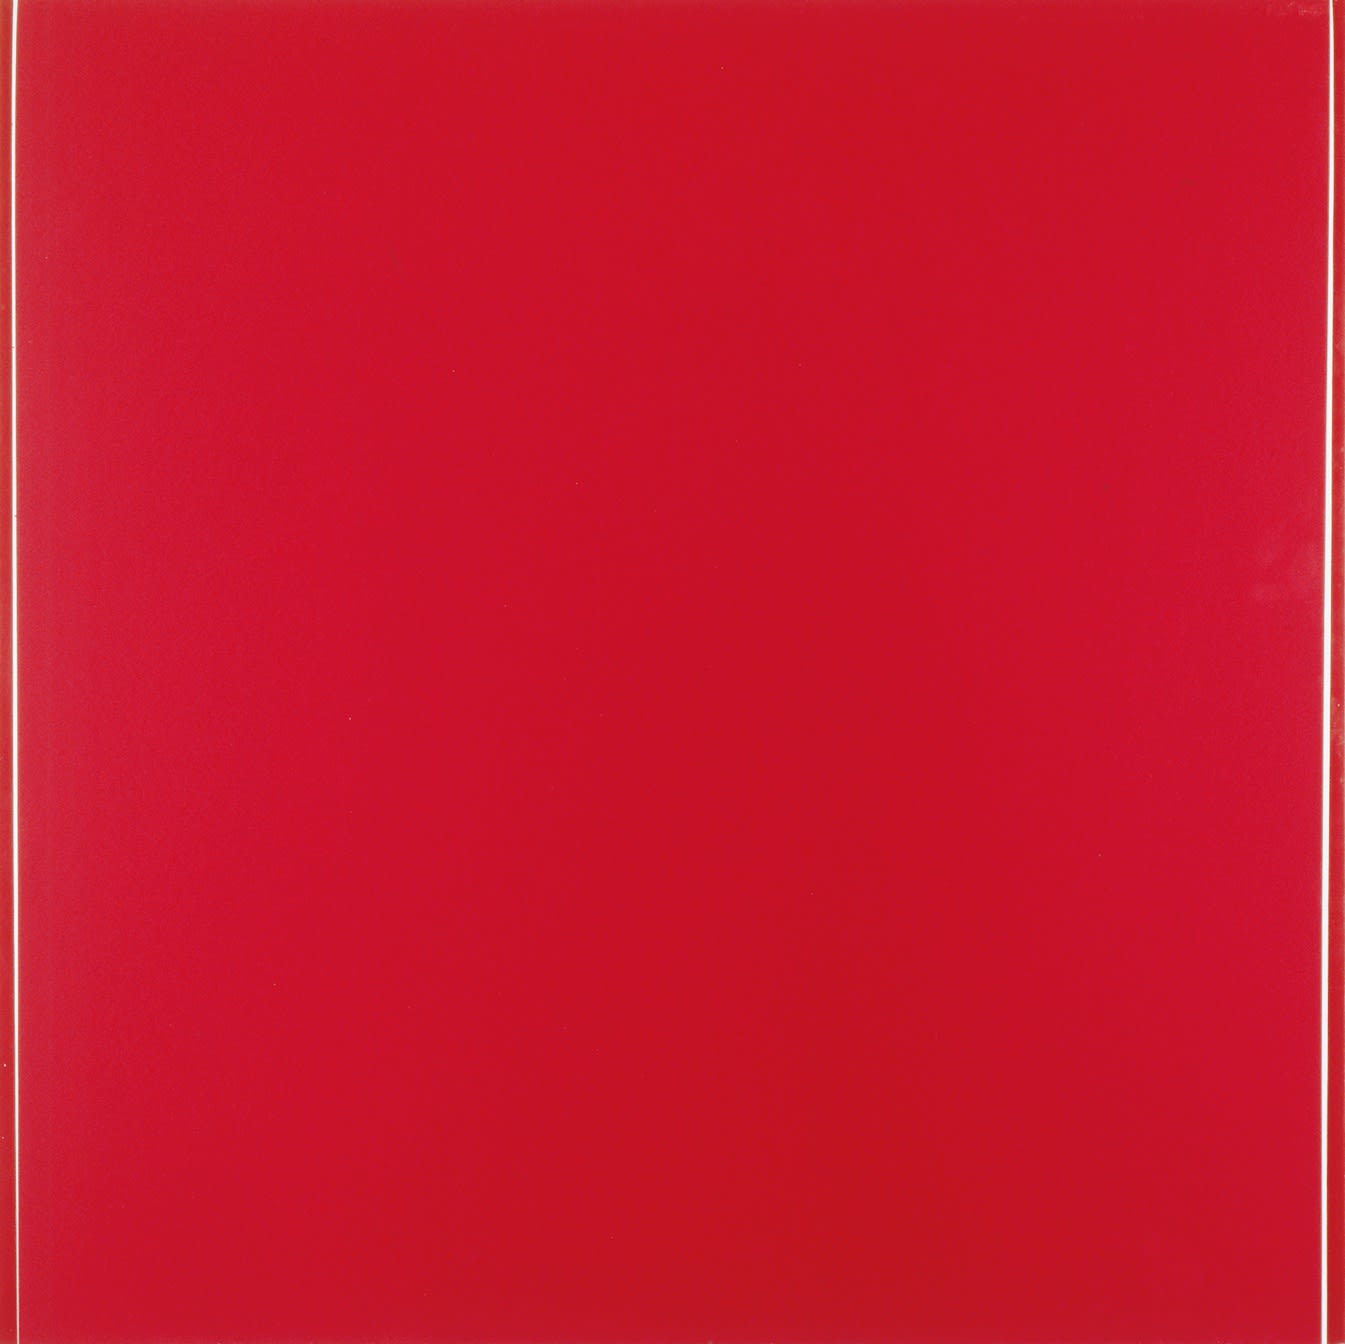 Ian Davenport, Untitled Tip Painting, Red White Red, 2004